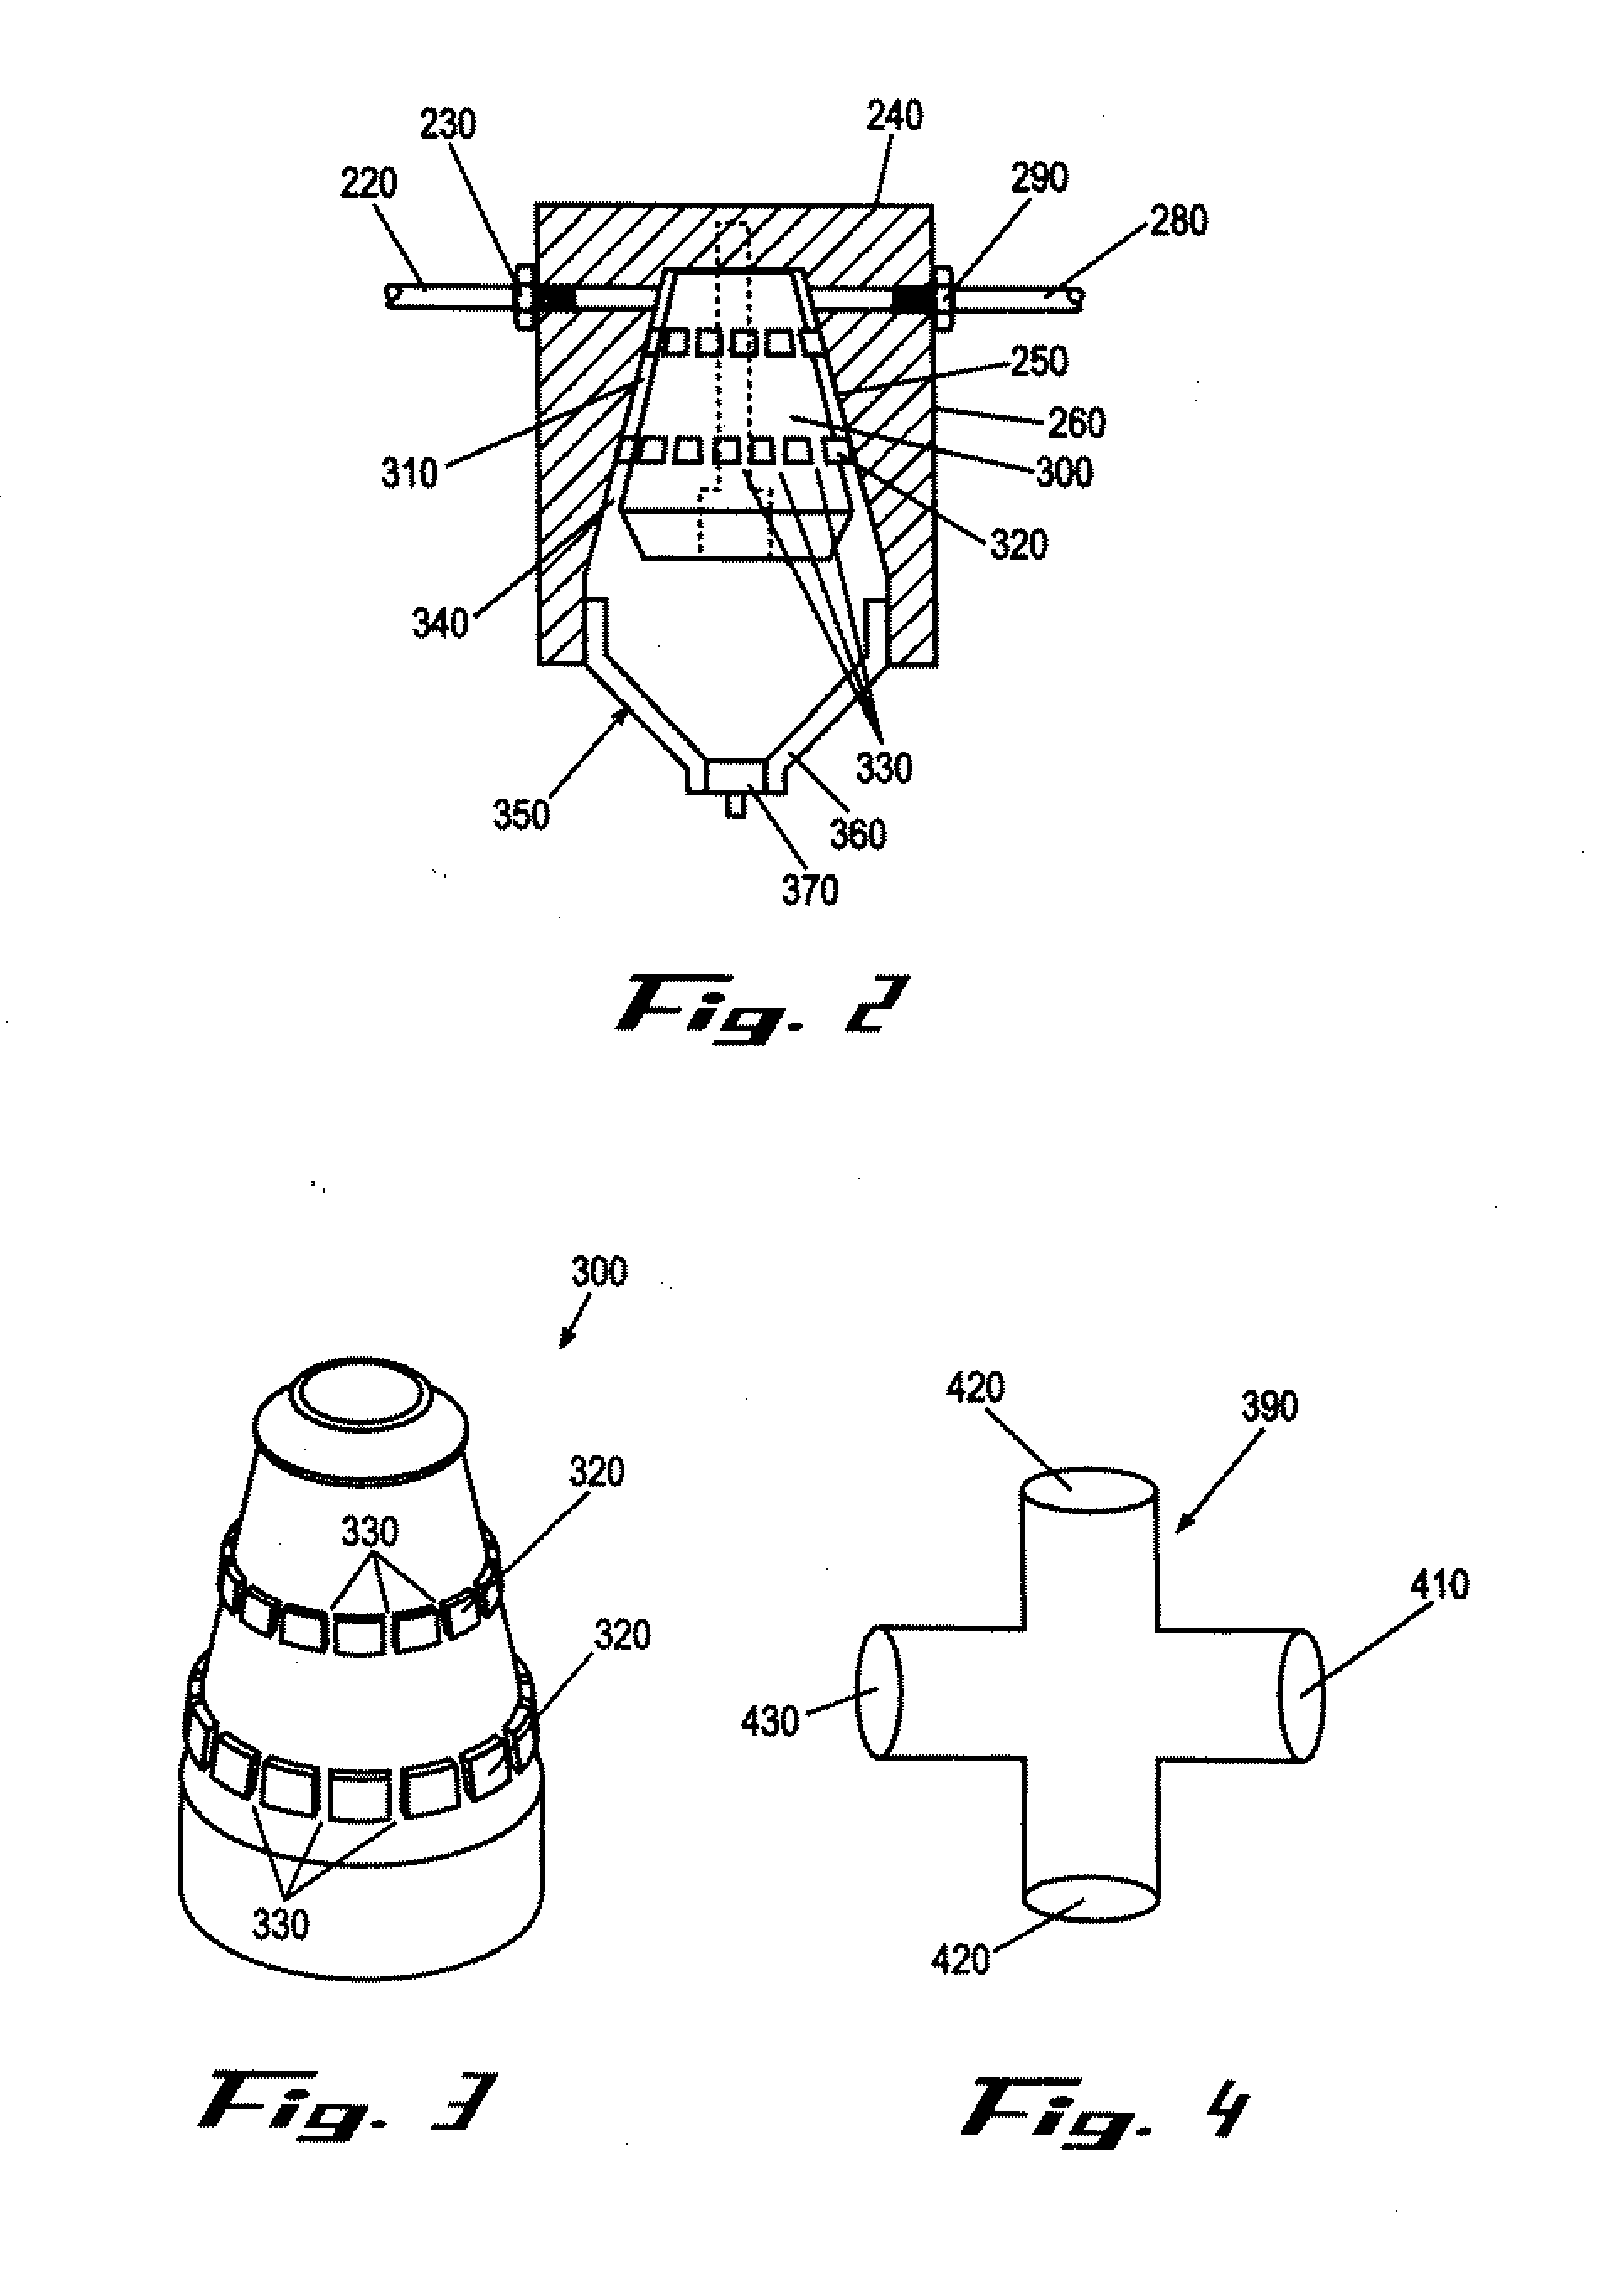 System and Method for Producing Foamed and Steamed Milk from Milk Concentrate